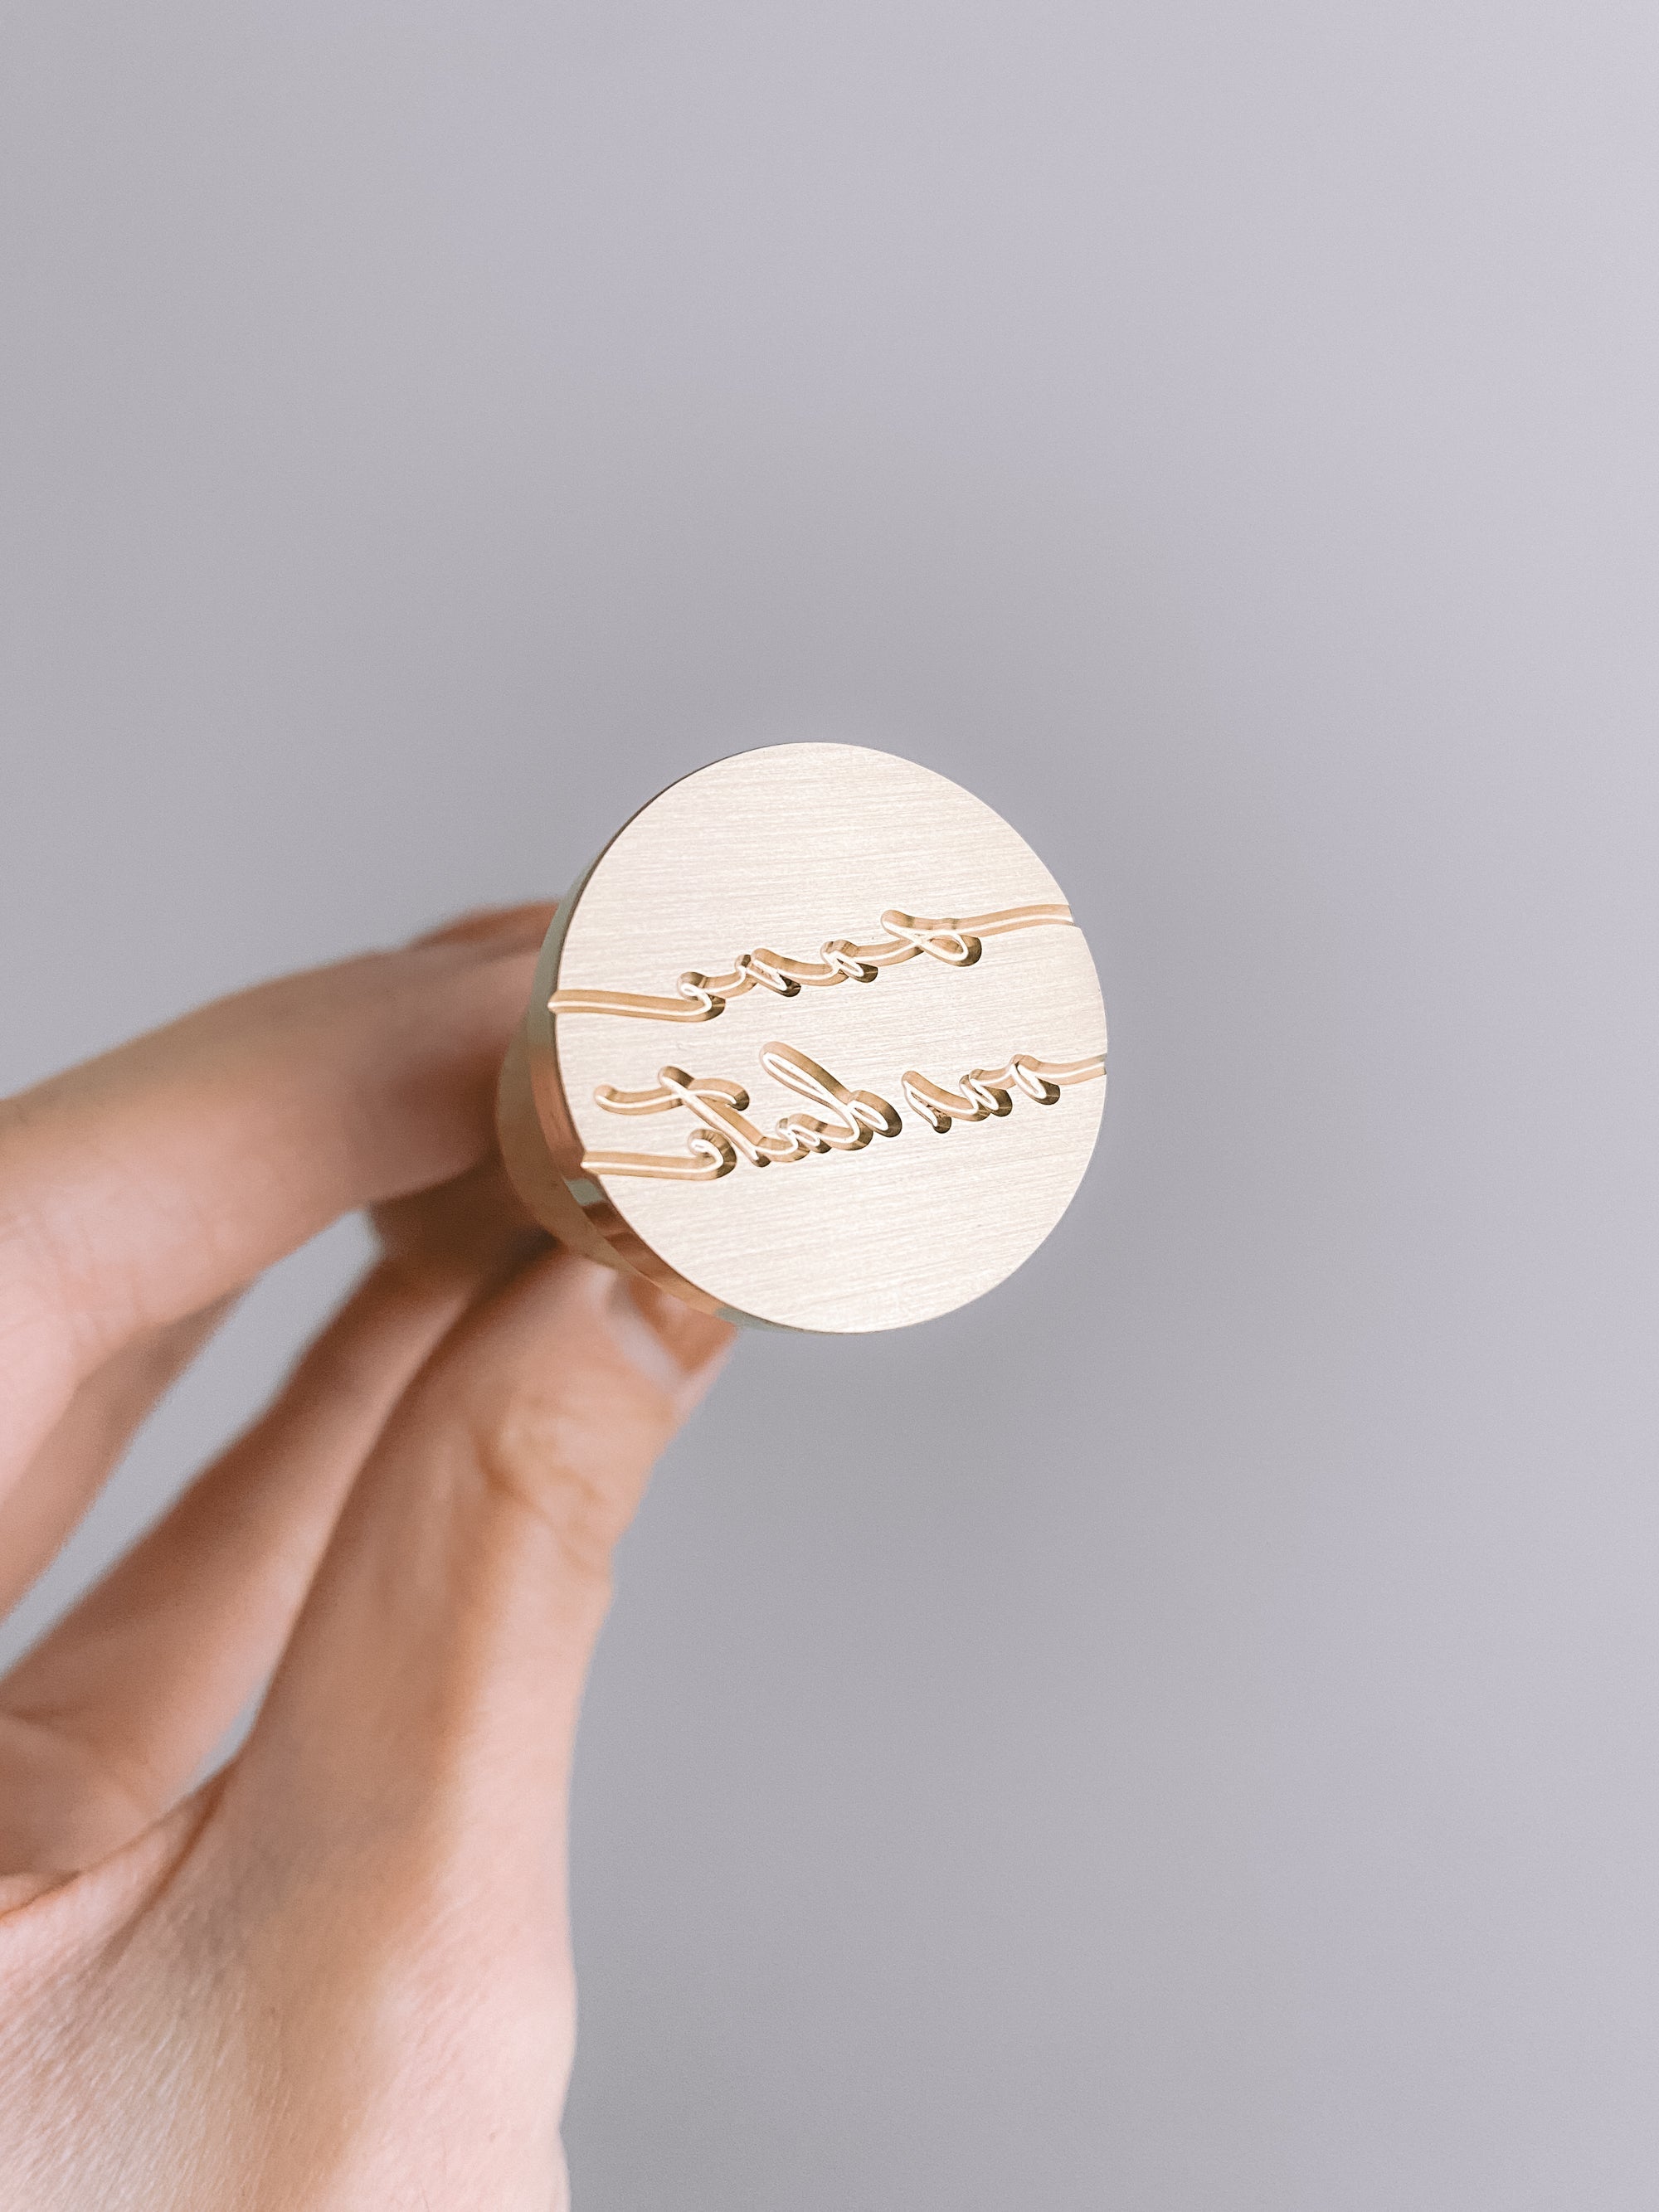 Save the Date in Gold | Steph B. and Co. x Artisaire (pack of 25) Wax Seals  by undefined